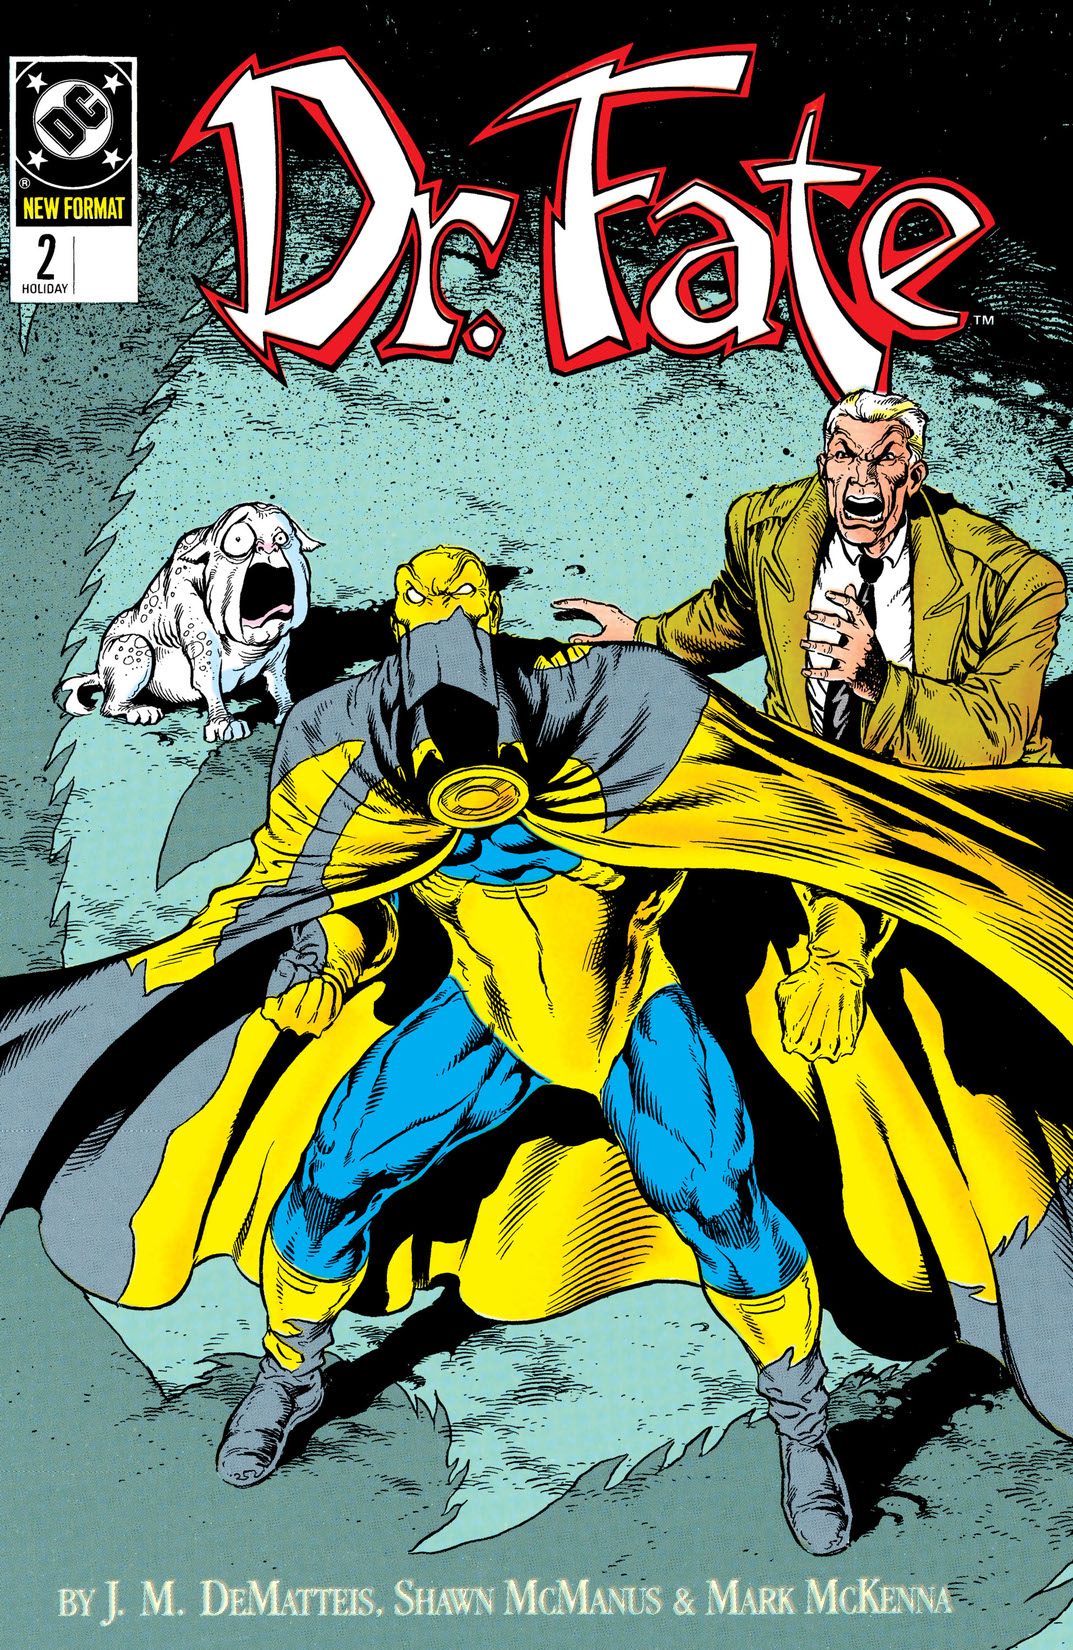 Dr. Fate (1988-) #2 preview images